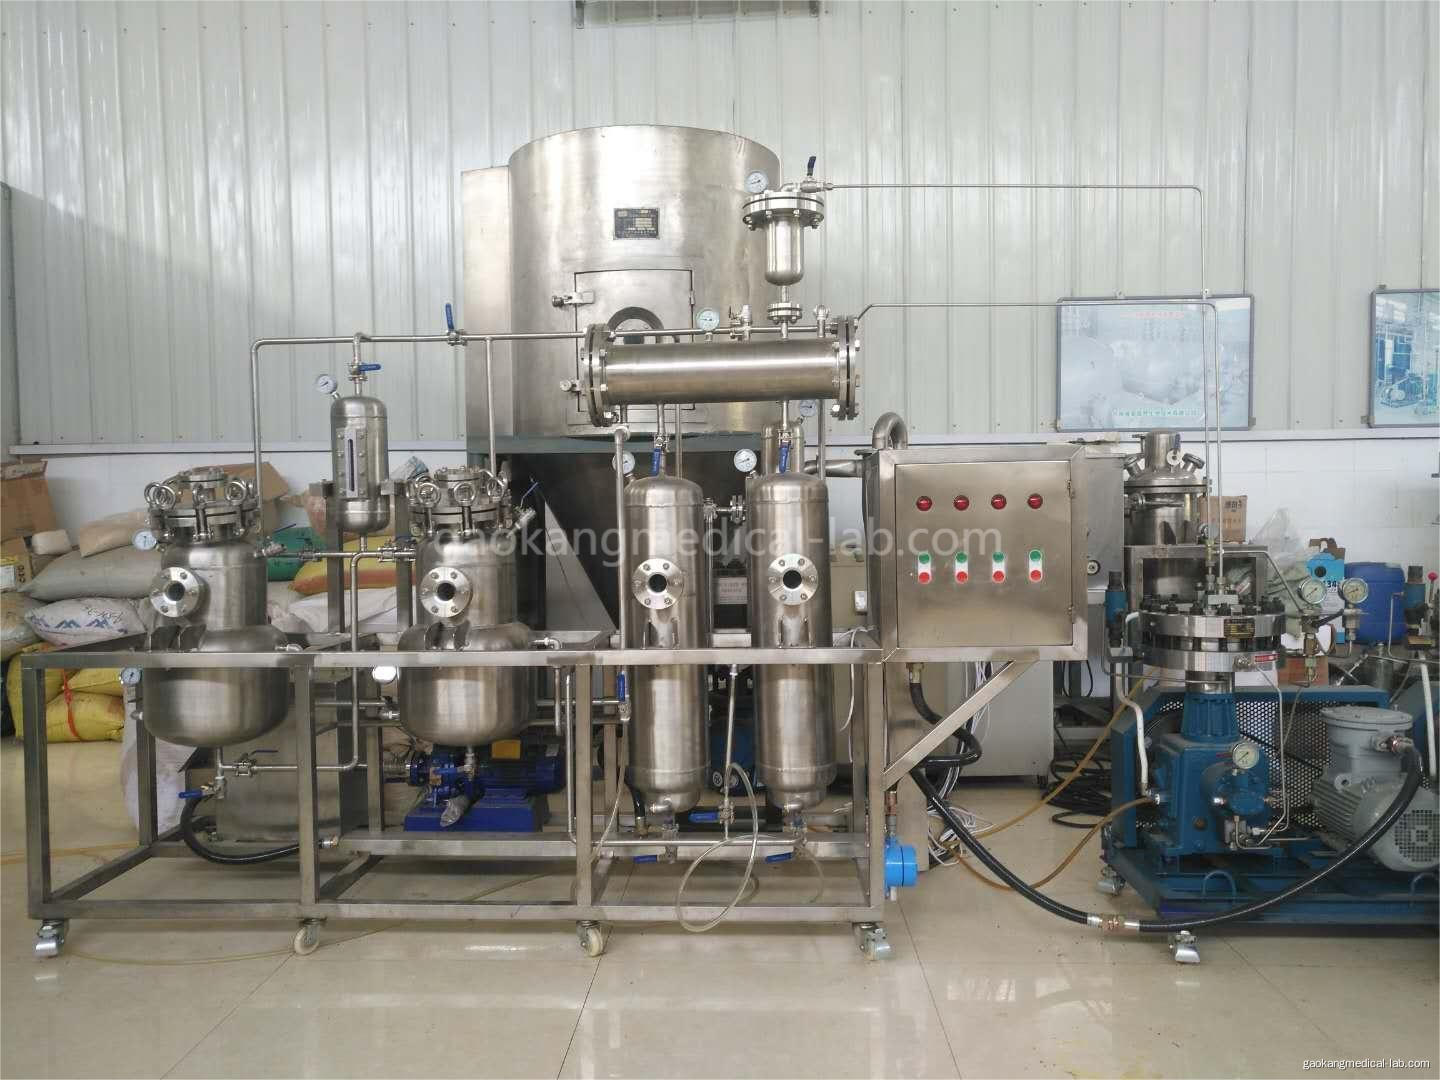 subcritical extraction machine for protein extracted from plants